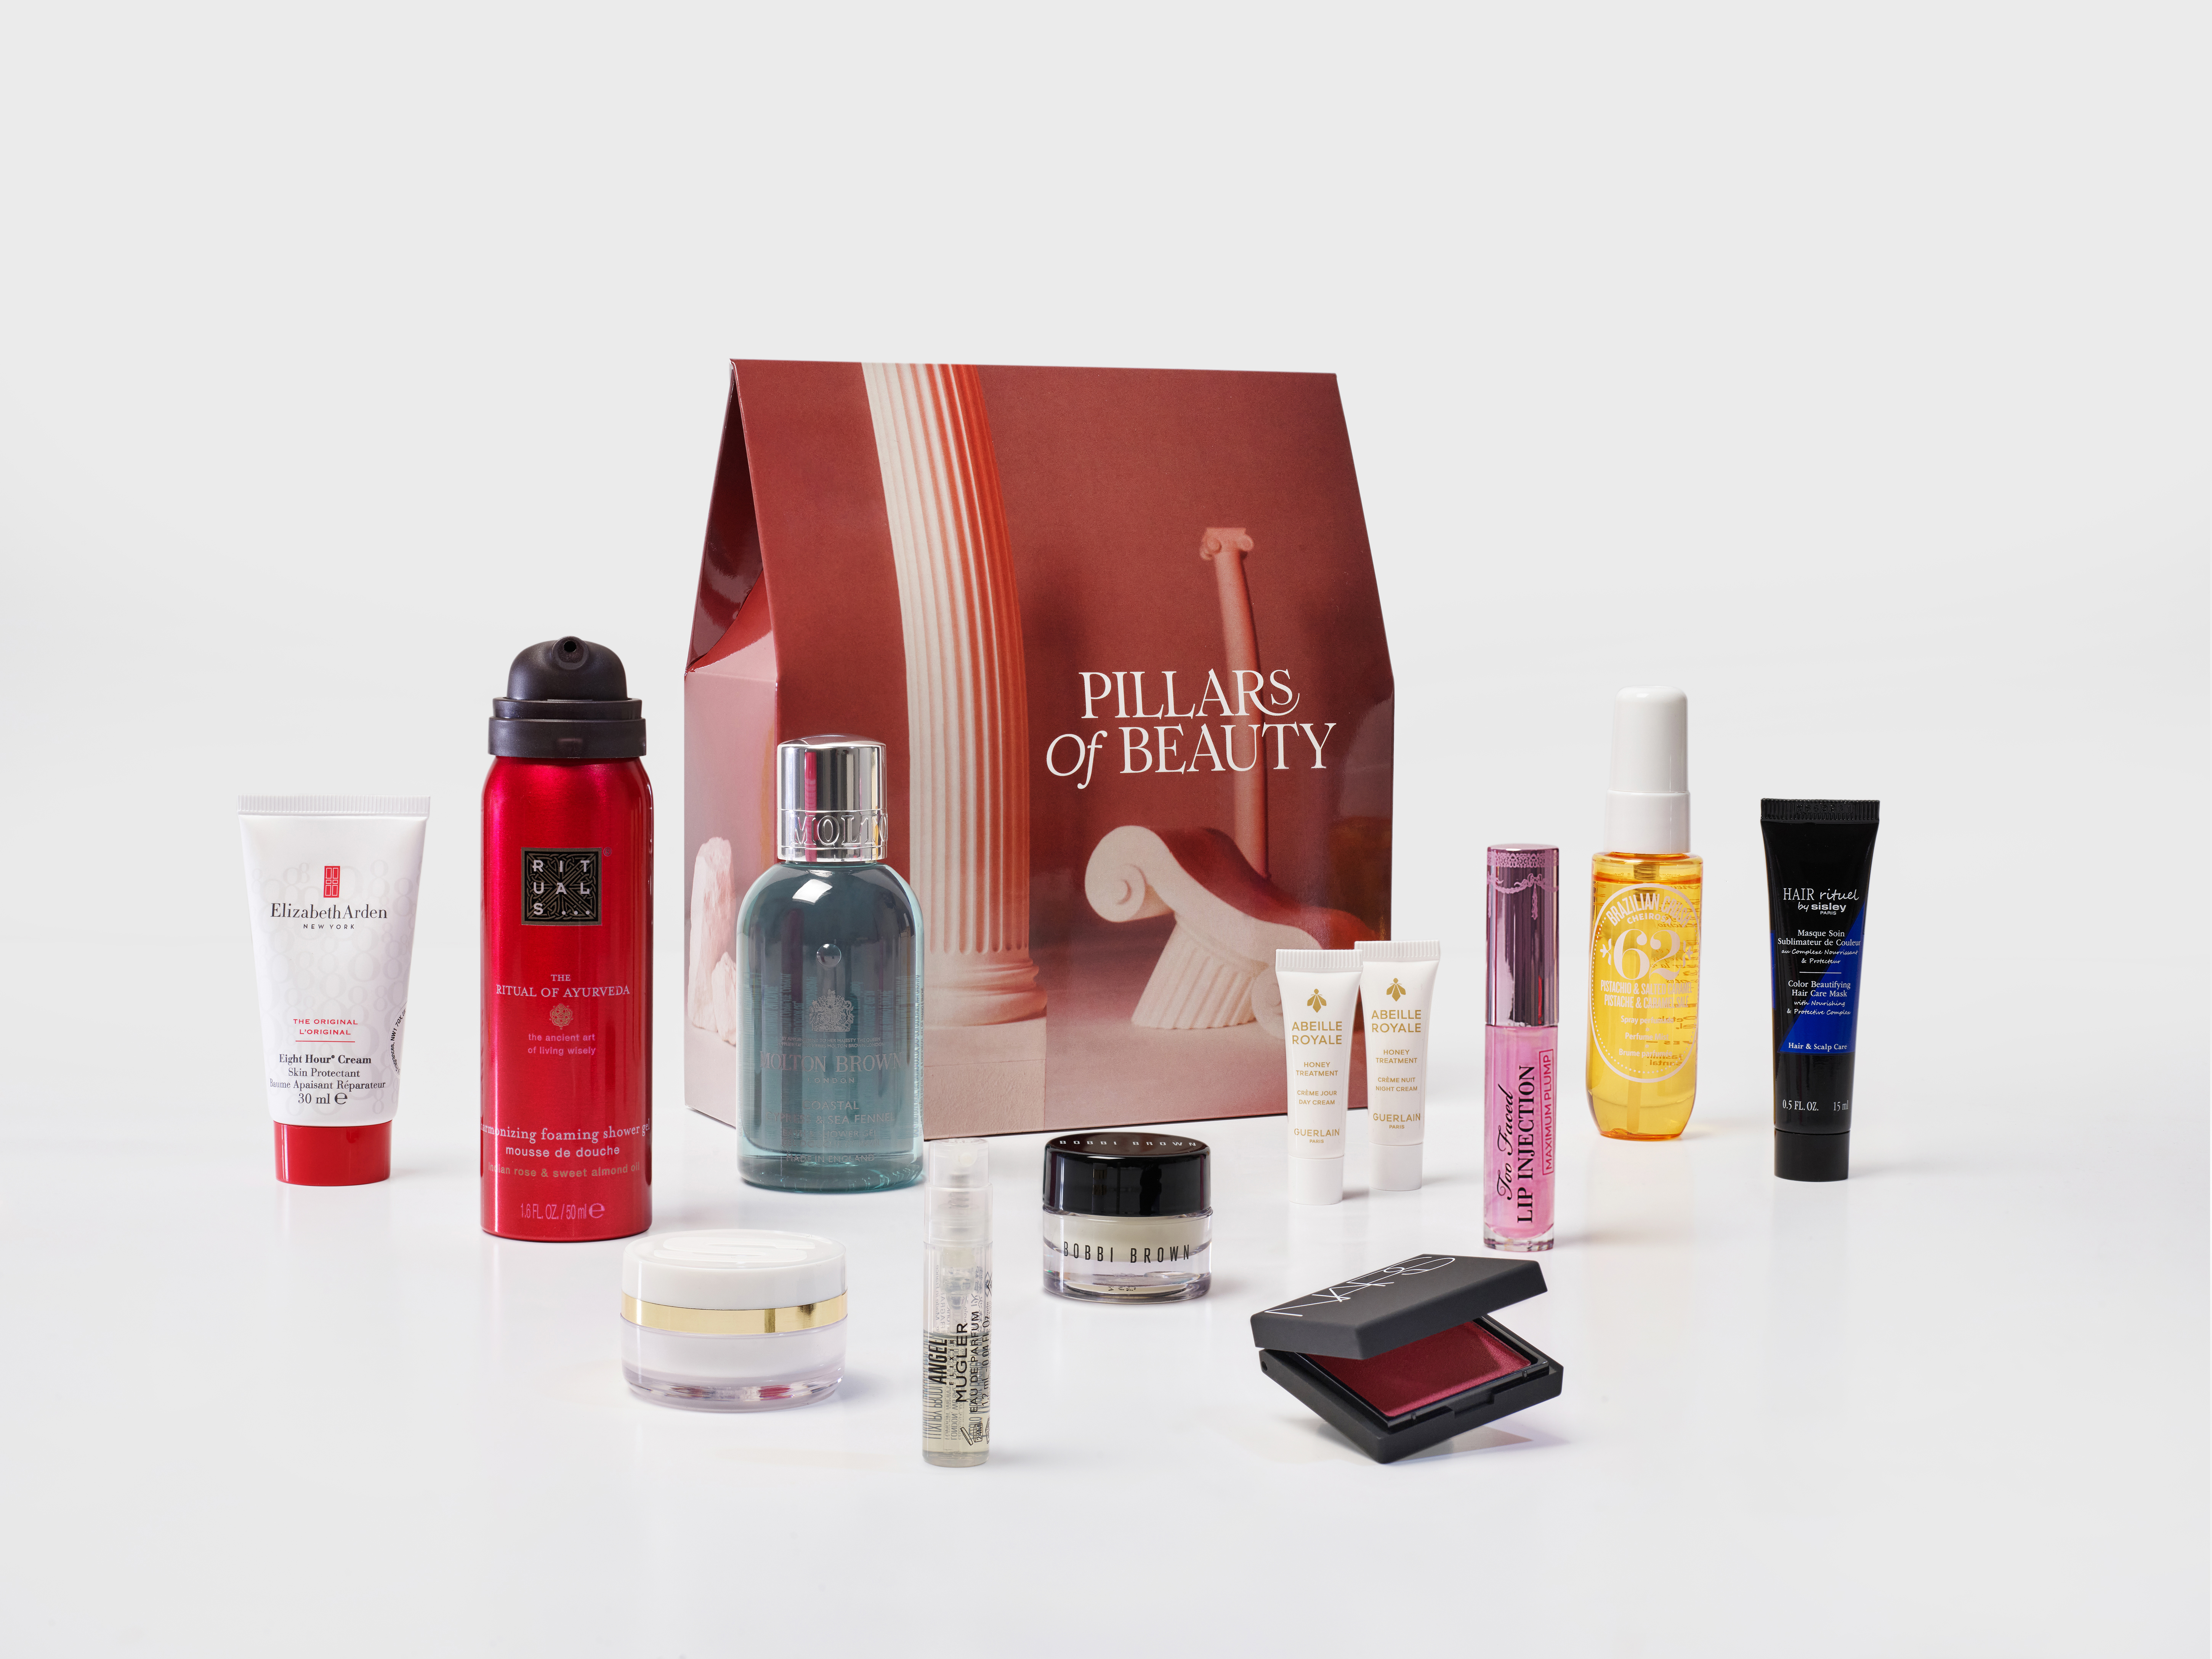 Spend €220 in Beauty and Receive your complimentary gift worth over €151